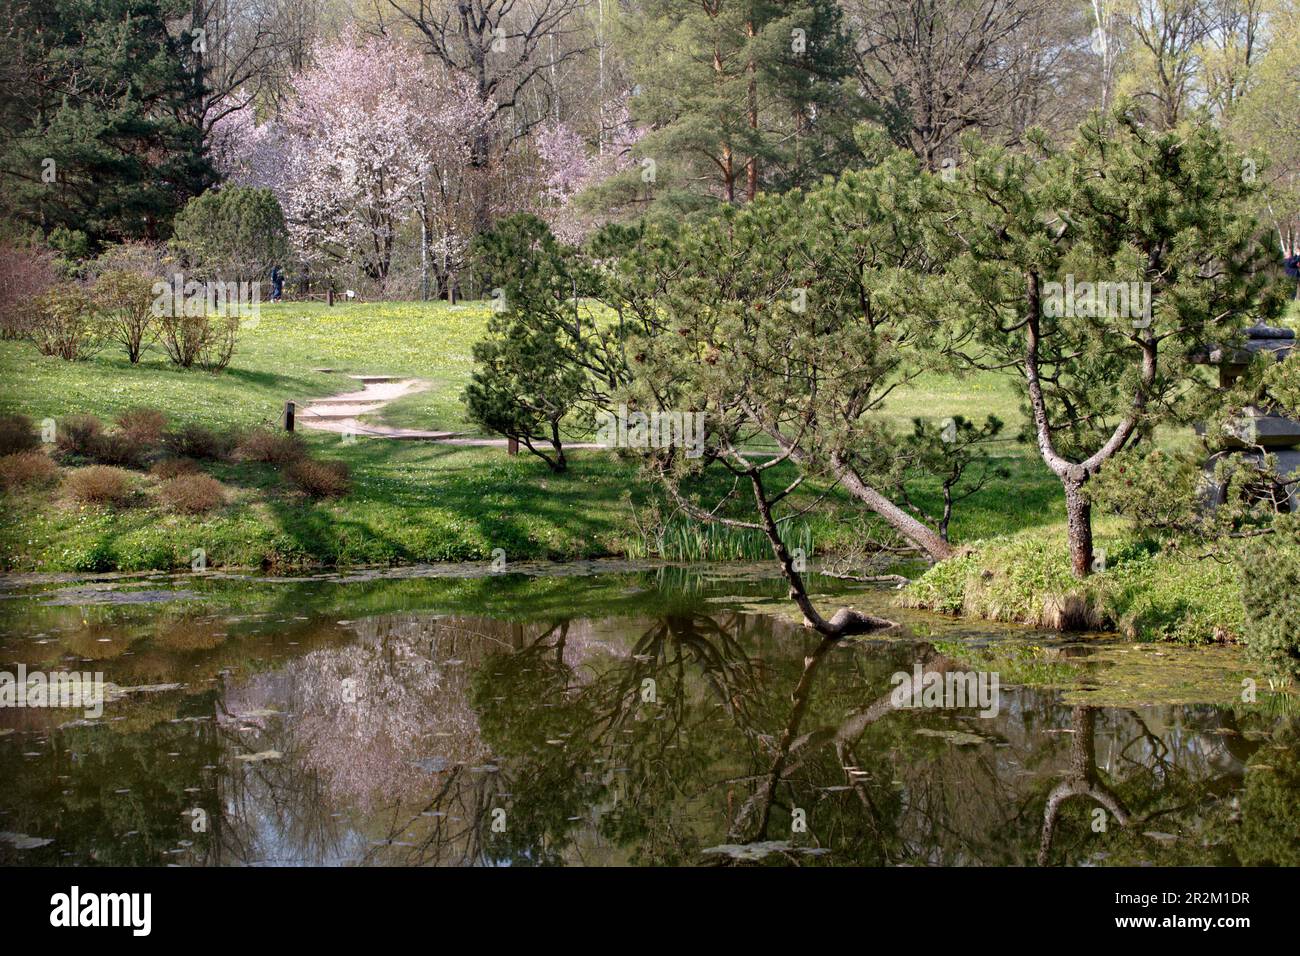 Japanese Garden in the Moscow Botanical Garden. Small pond with pine trees. Blooming sakura trees in the park Stock Photo